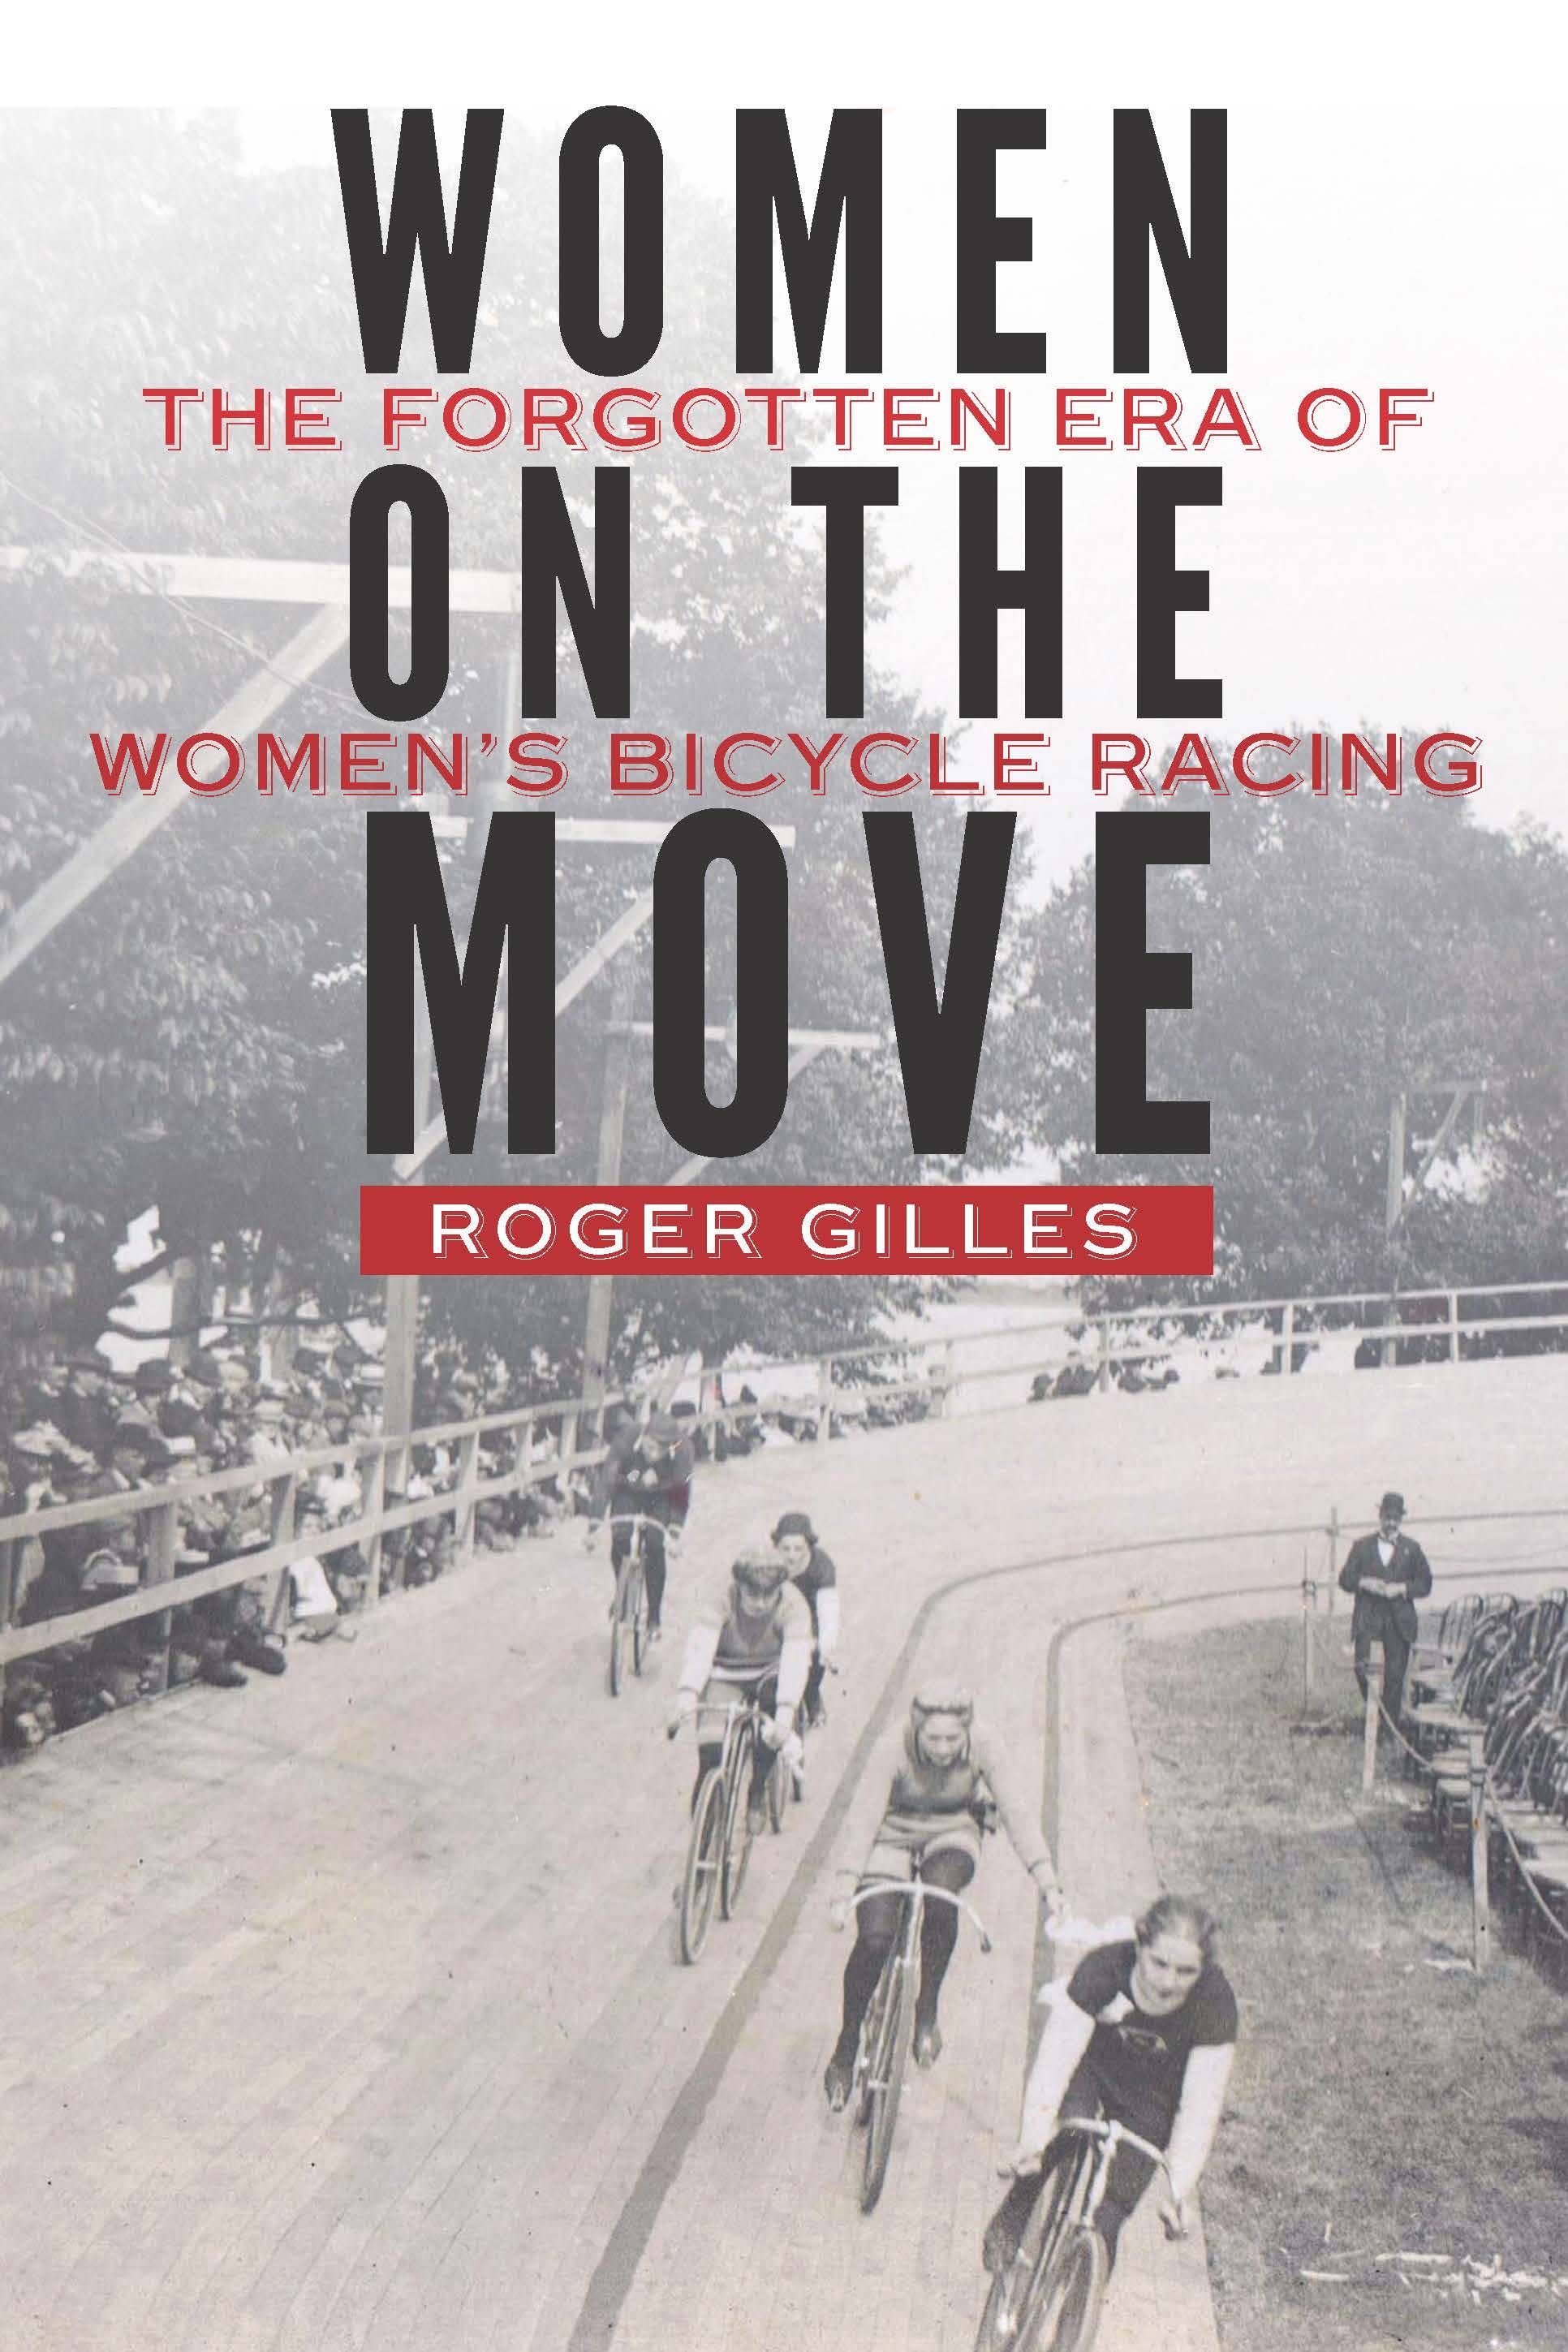 Roger Gilles' book "Women on the Move: The Forgotten Era of Women's Bicycle Racing"